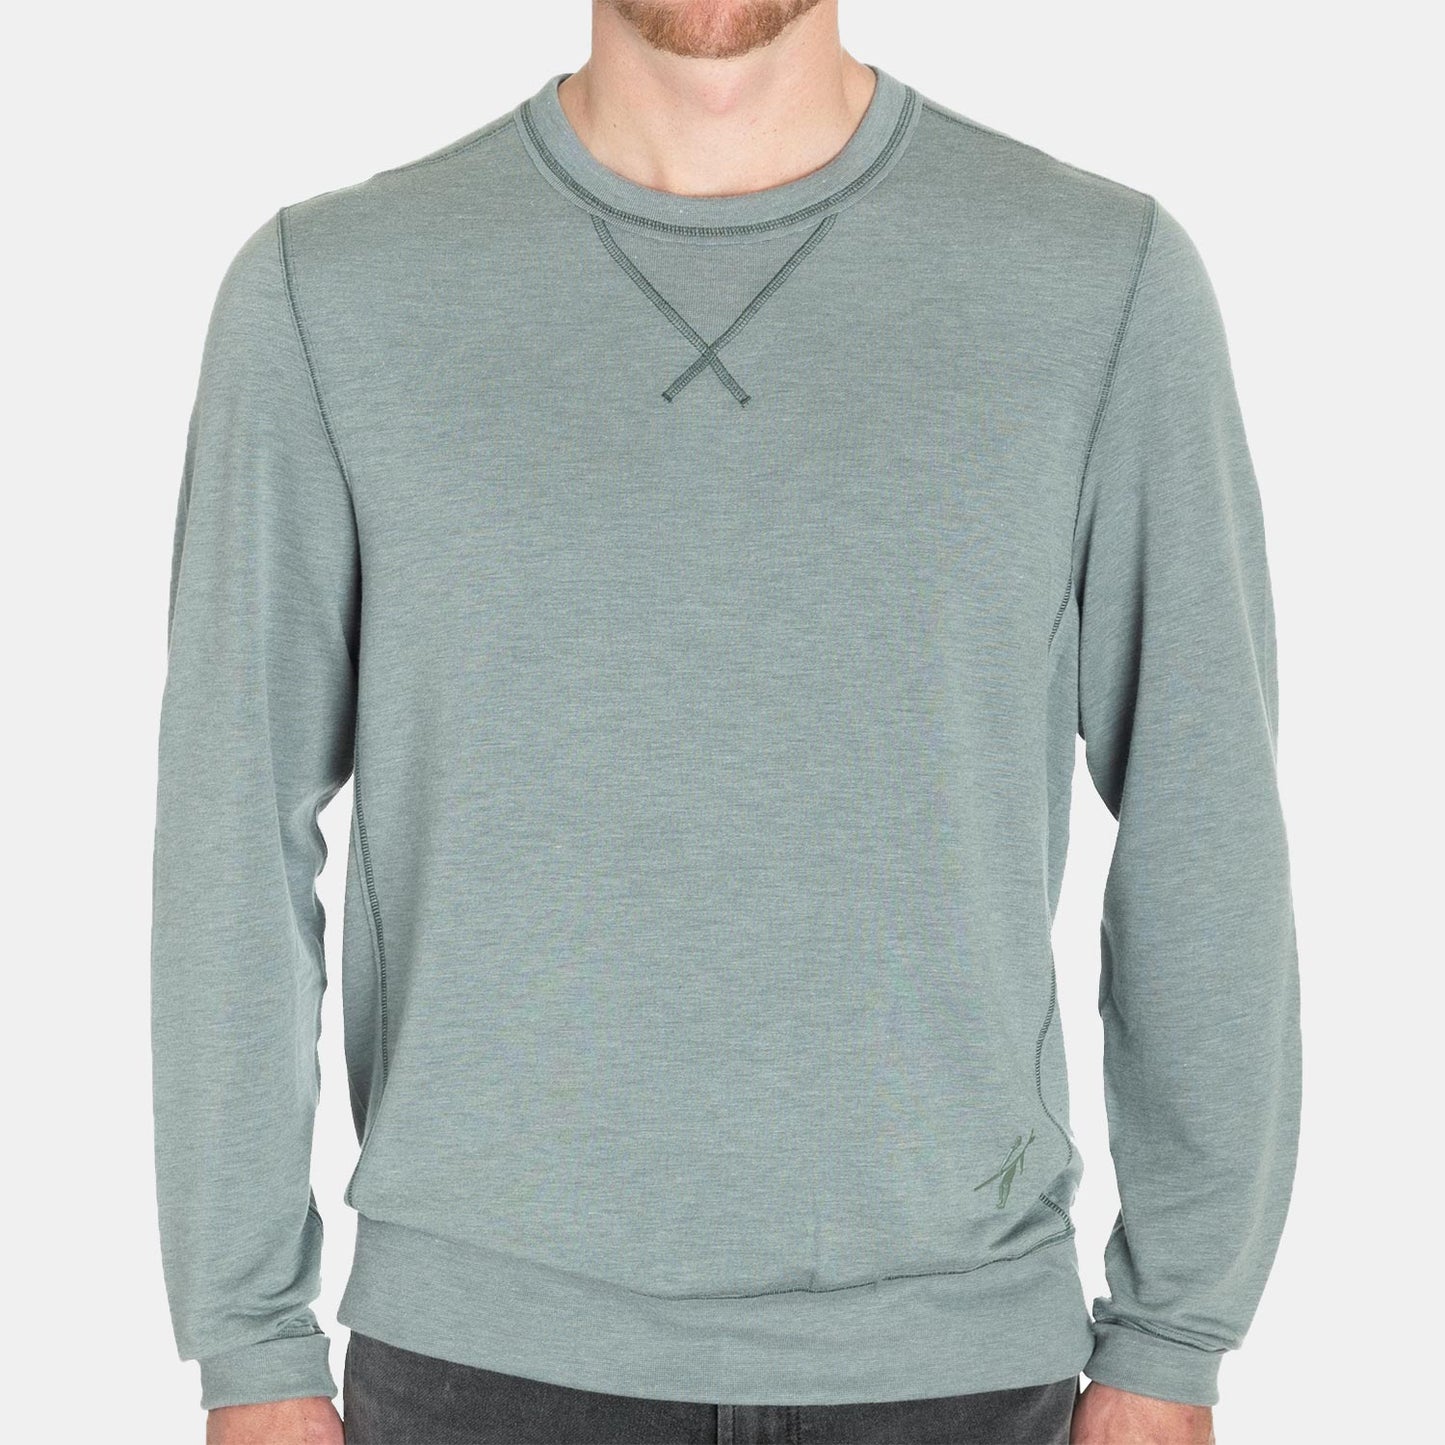 Toes on the Nose Super Soft L/S Crew in Seafoam Green